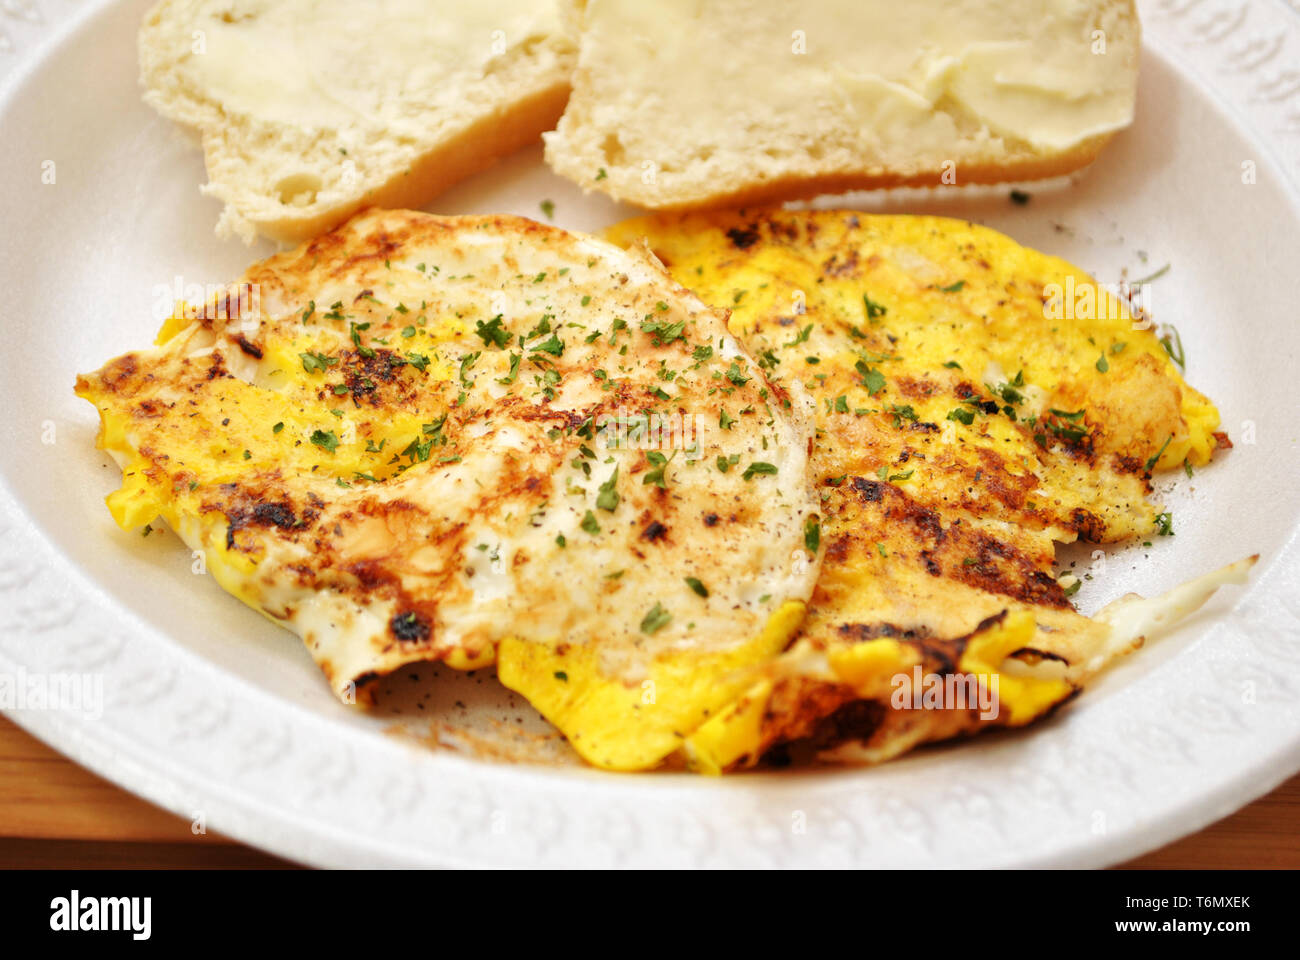 Fried Eggs with Buttered Bread Stock Photo